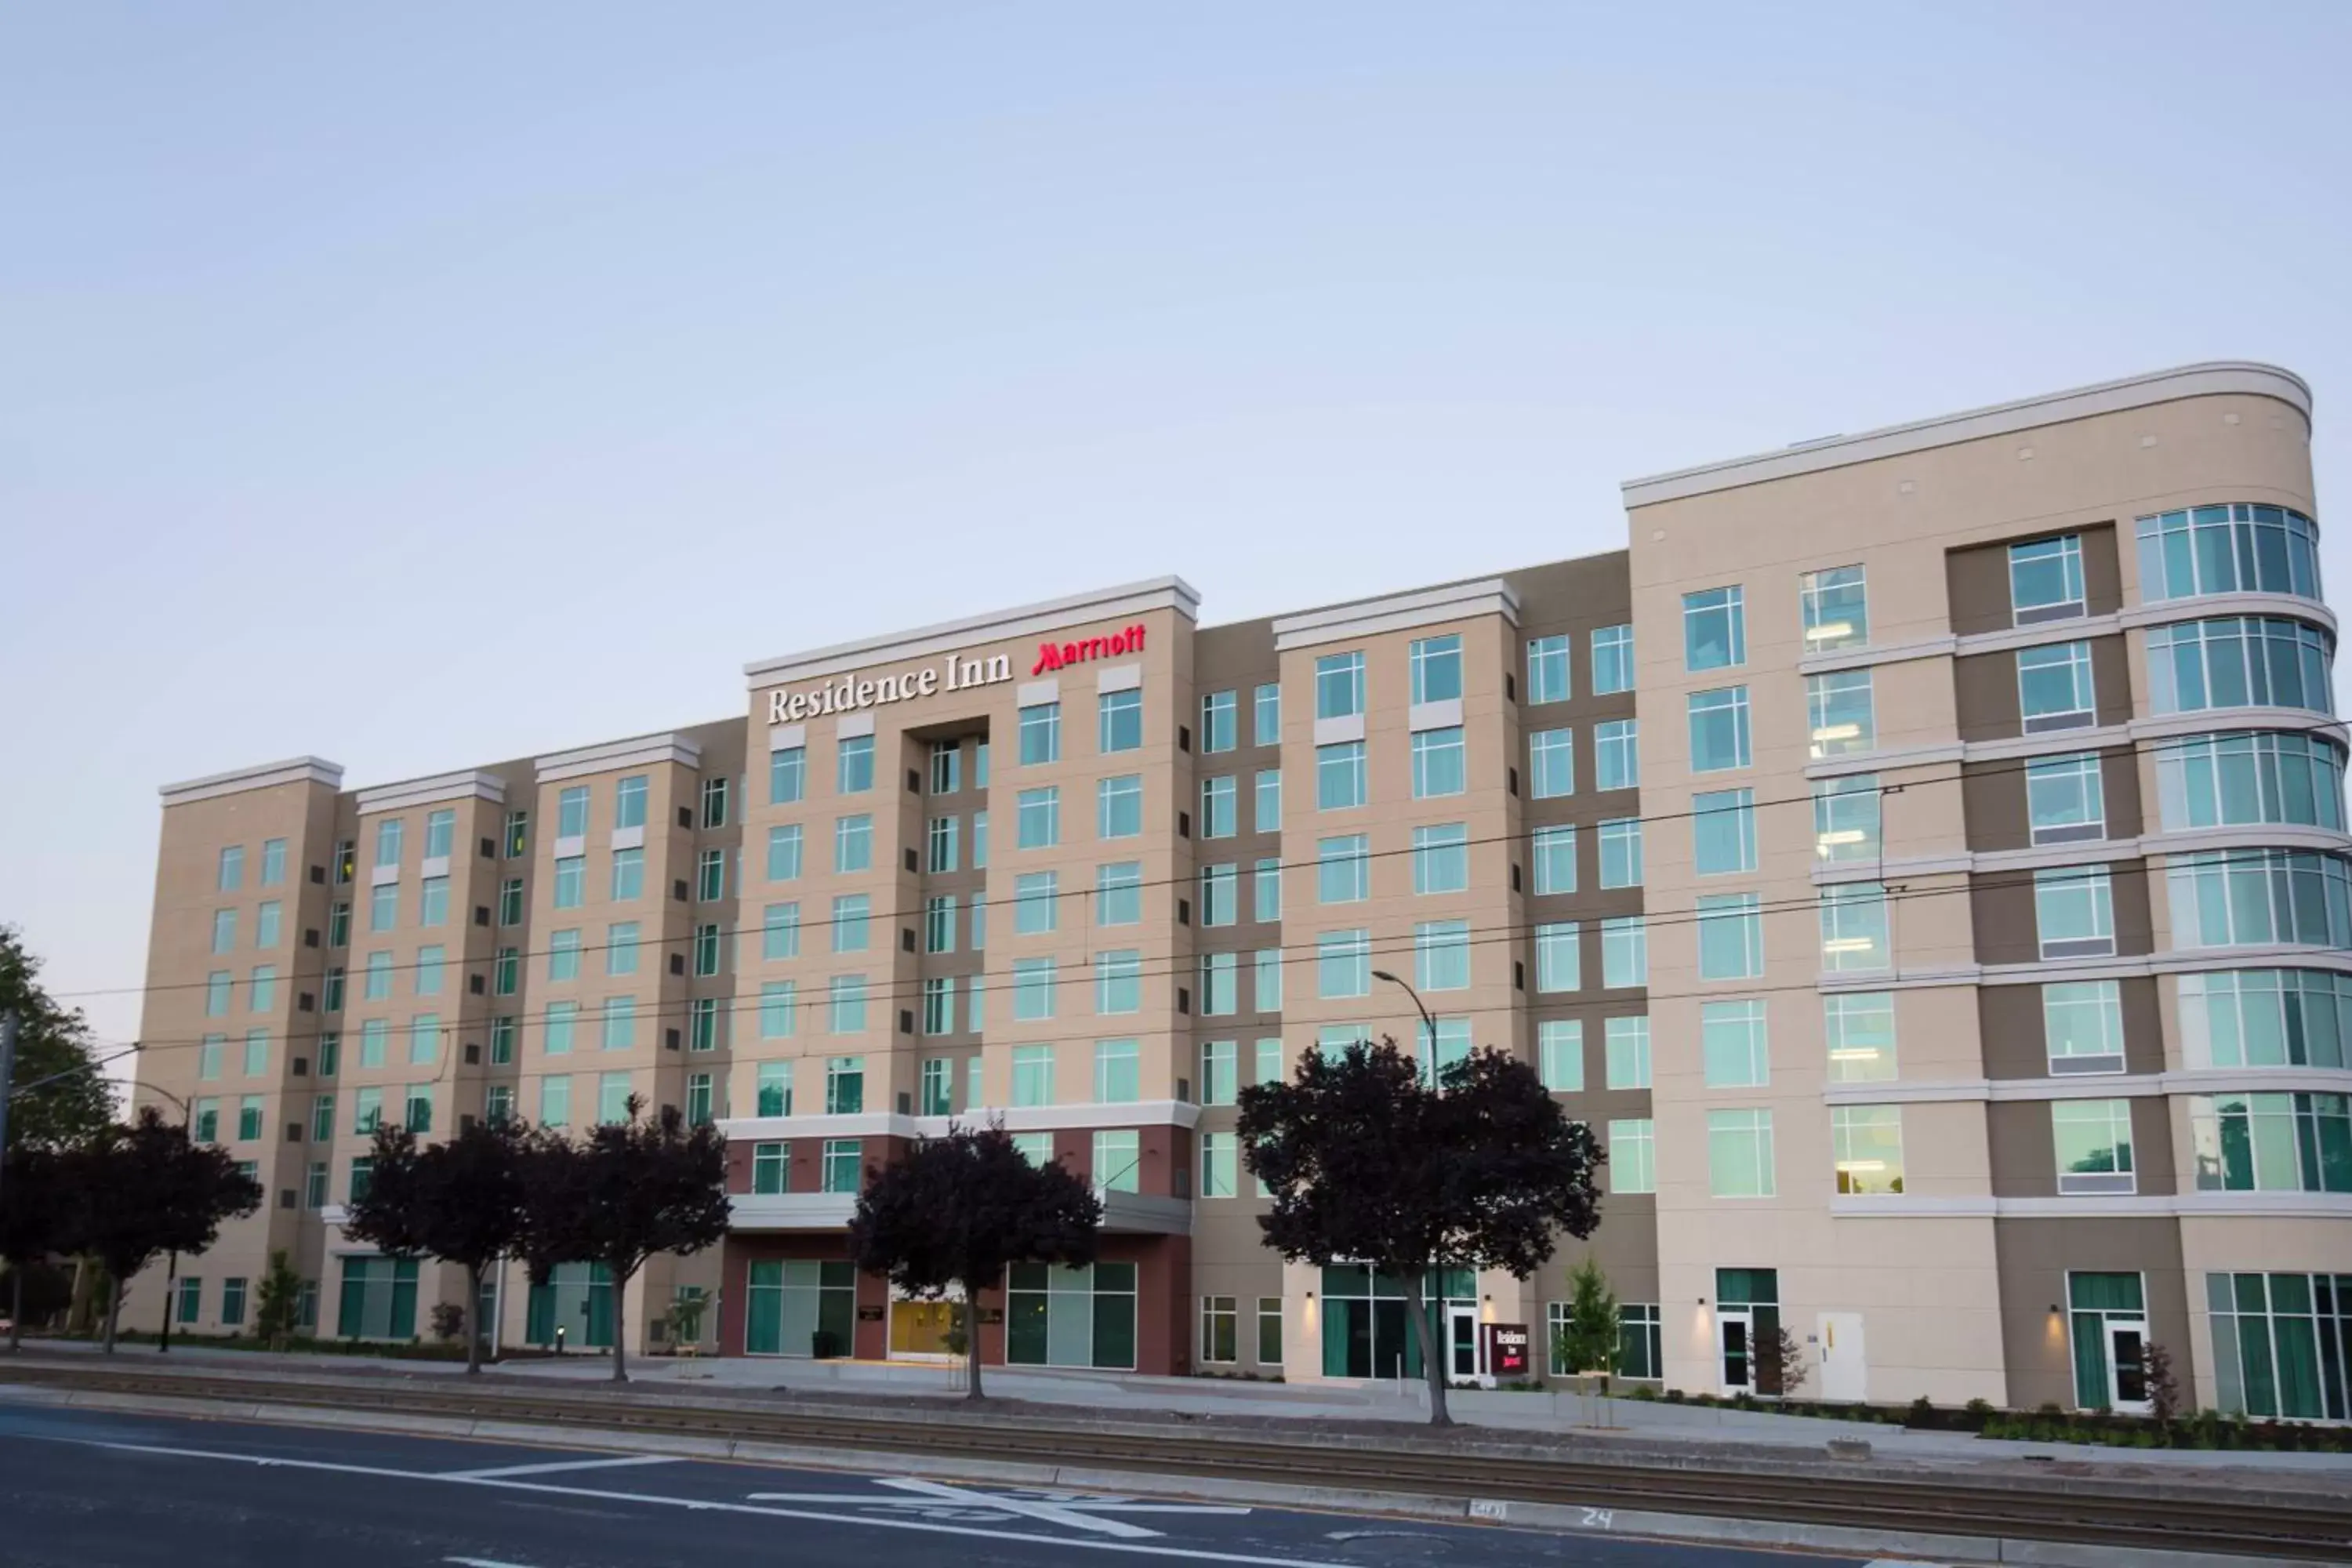 Property Building in Residence Inn by Marriott San Jose Airport